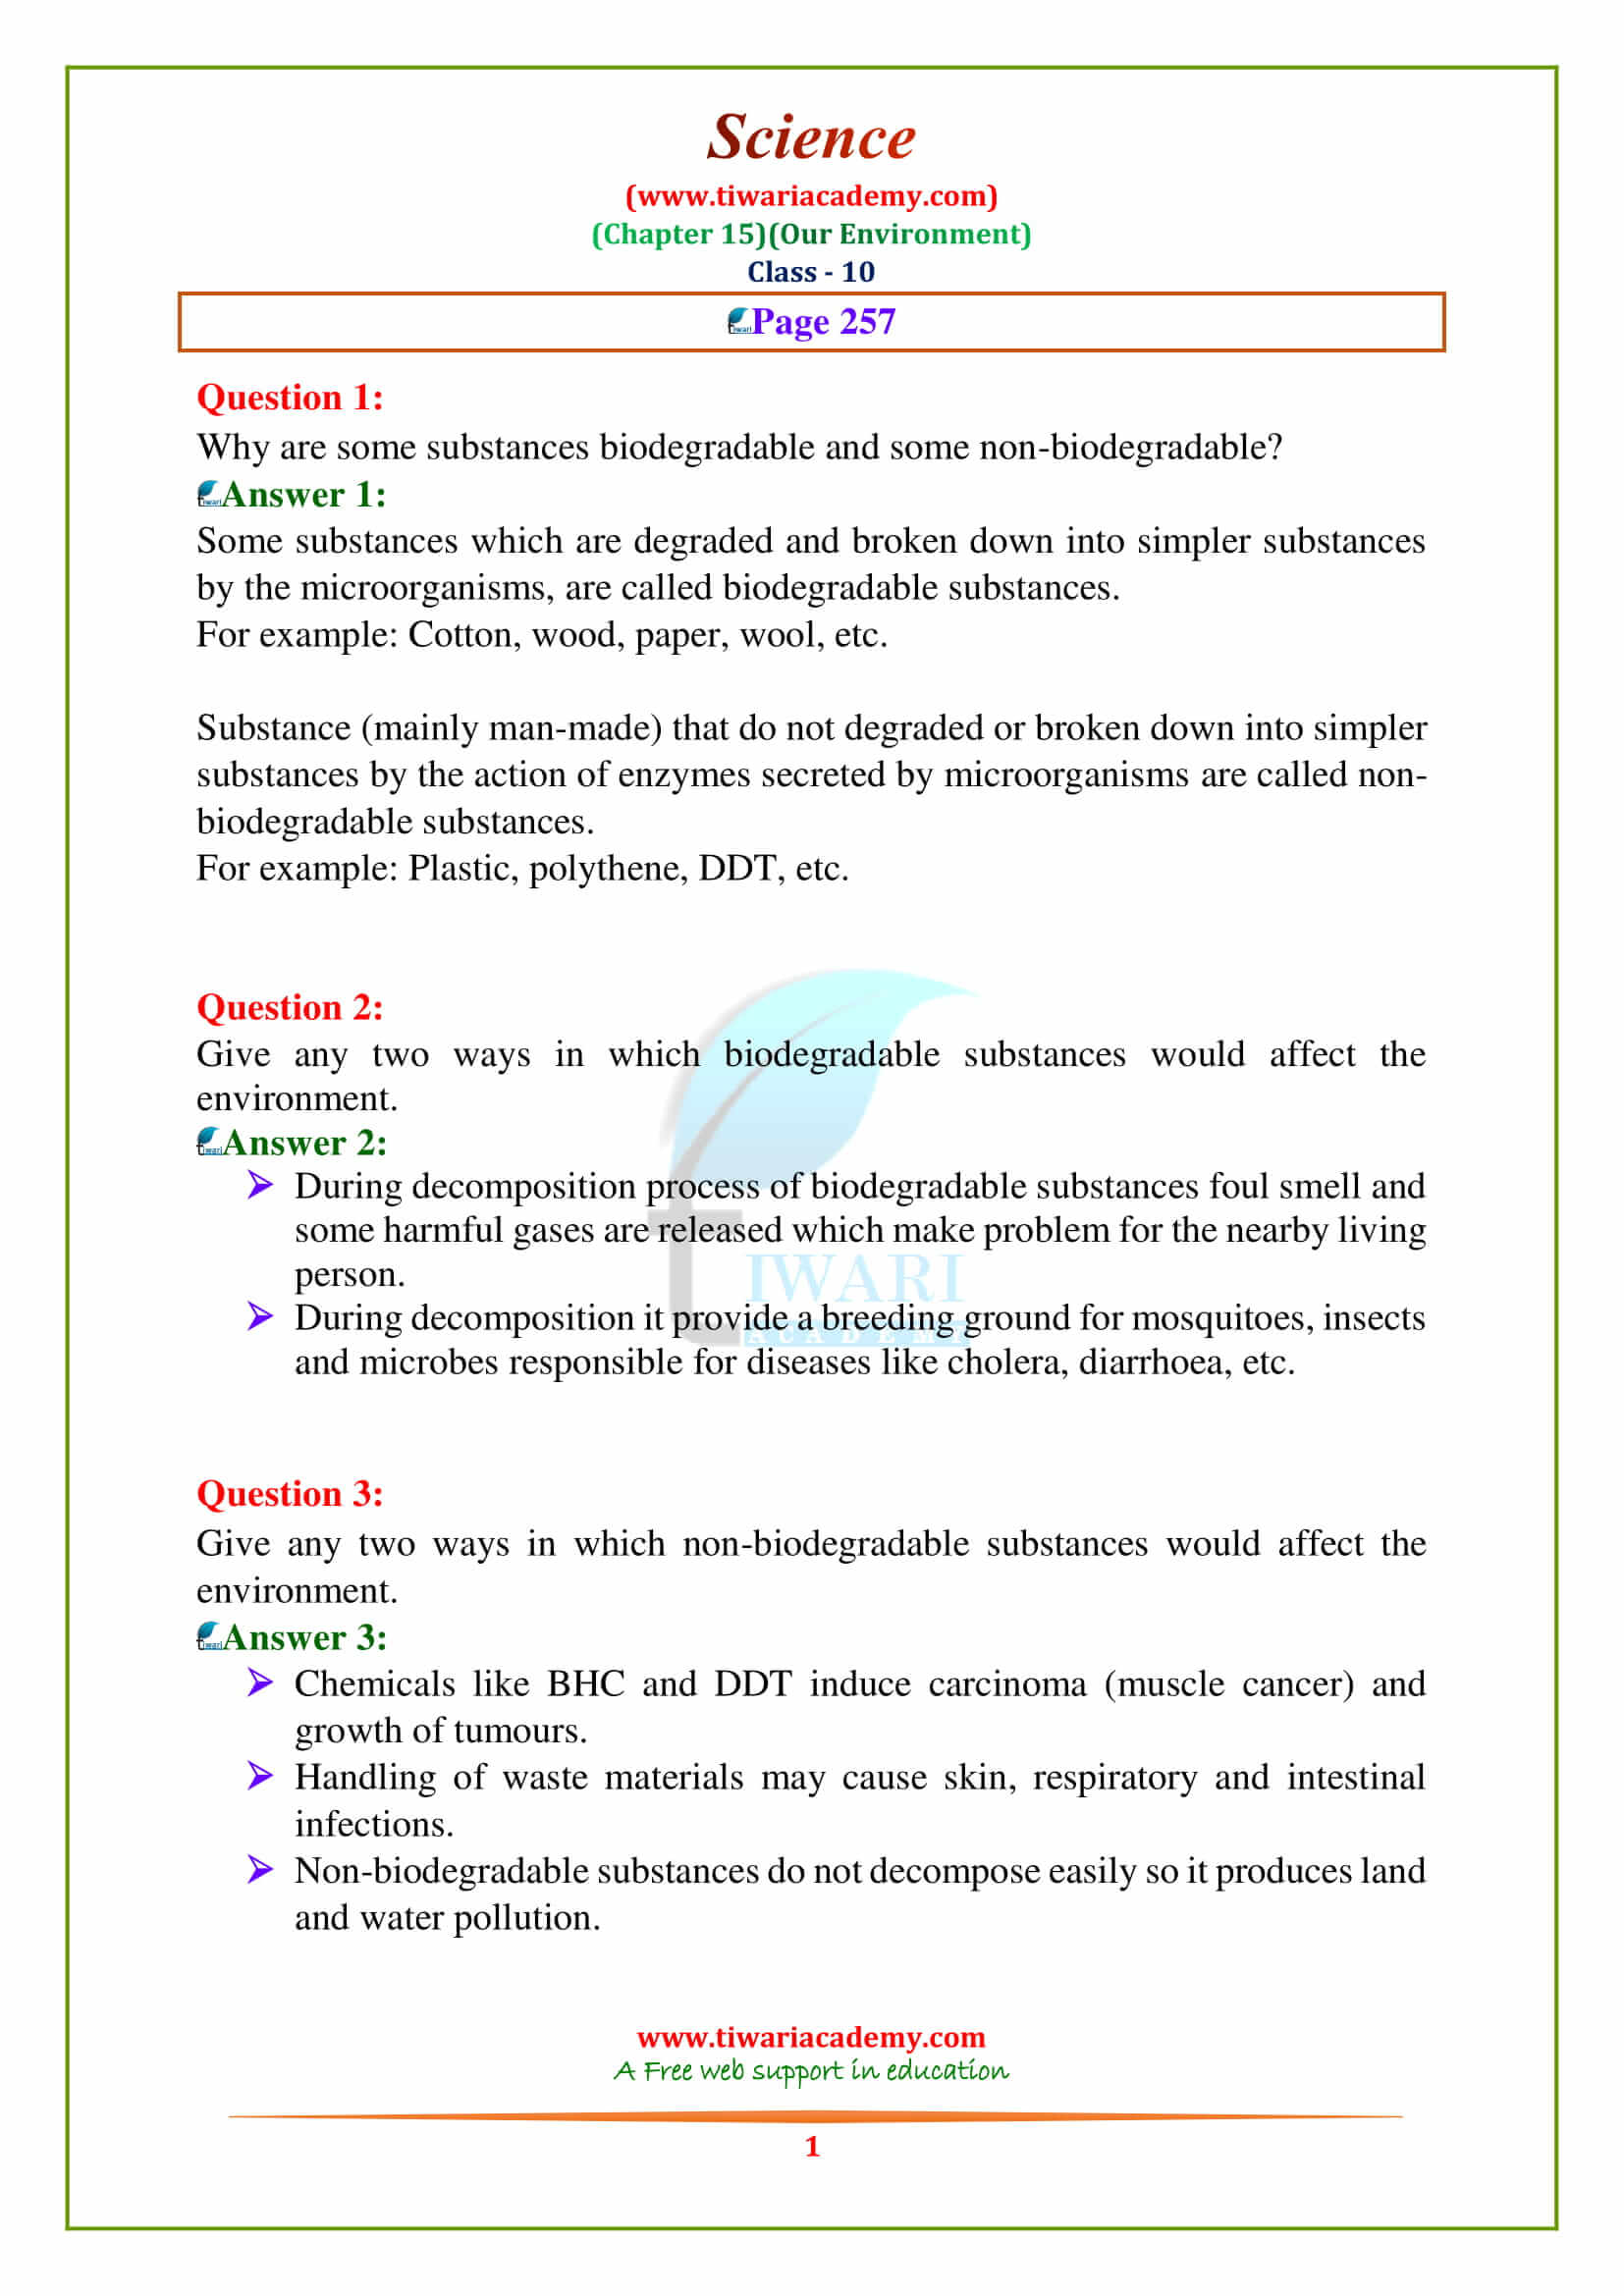 Class 10 Science Chapter 15 Our Environment Intext questions given on page 257 i